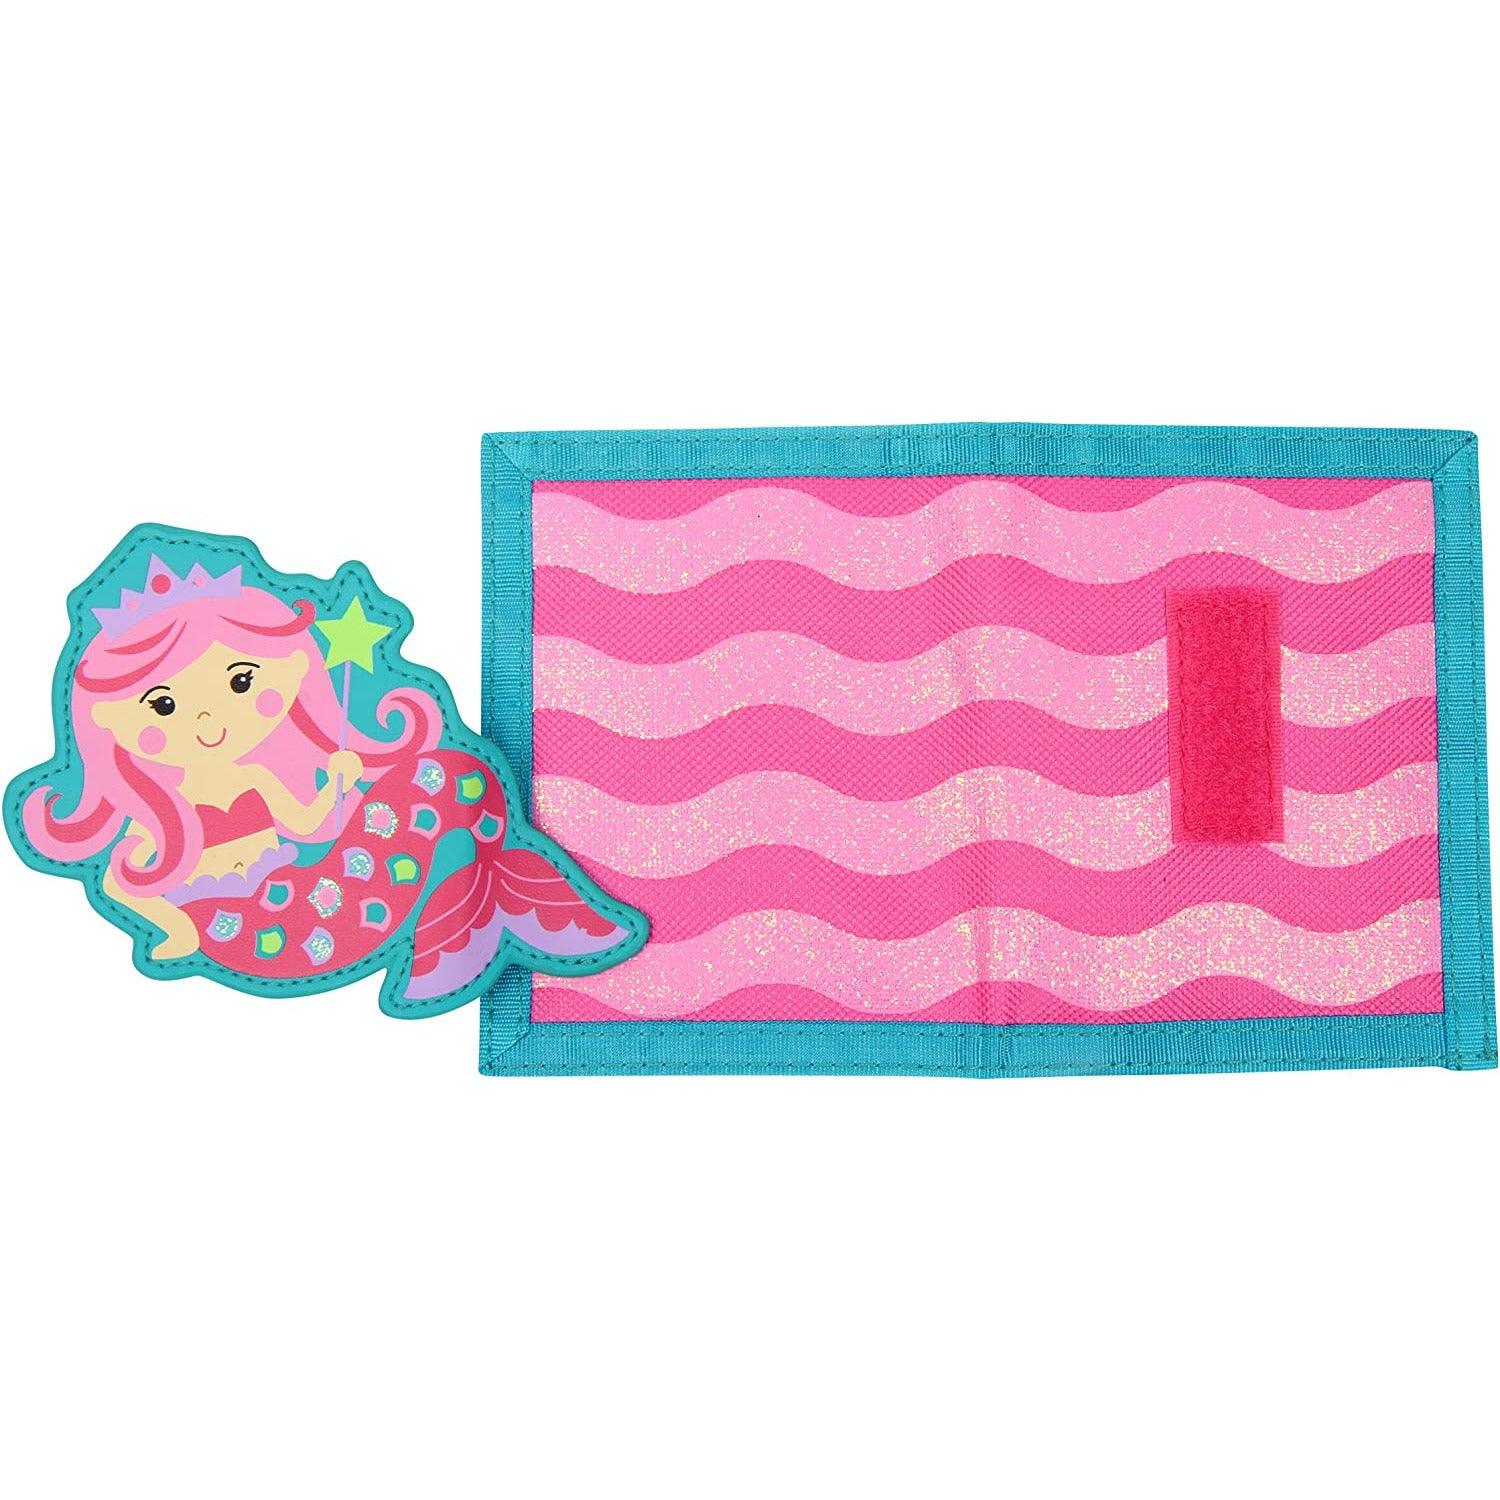 Stephen Joseph Kids Wallet One Size - Mermaid - BumbleToys - 14 Years & Up, 5-7 Years, 8-13 Years, Bags, Characters, Girls, Mermaid, Stephen Joseph, Wallet